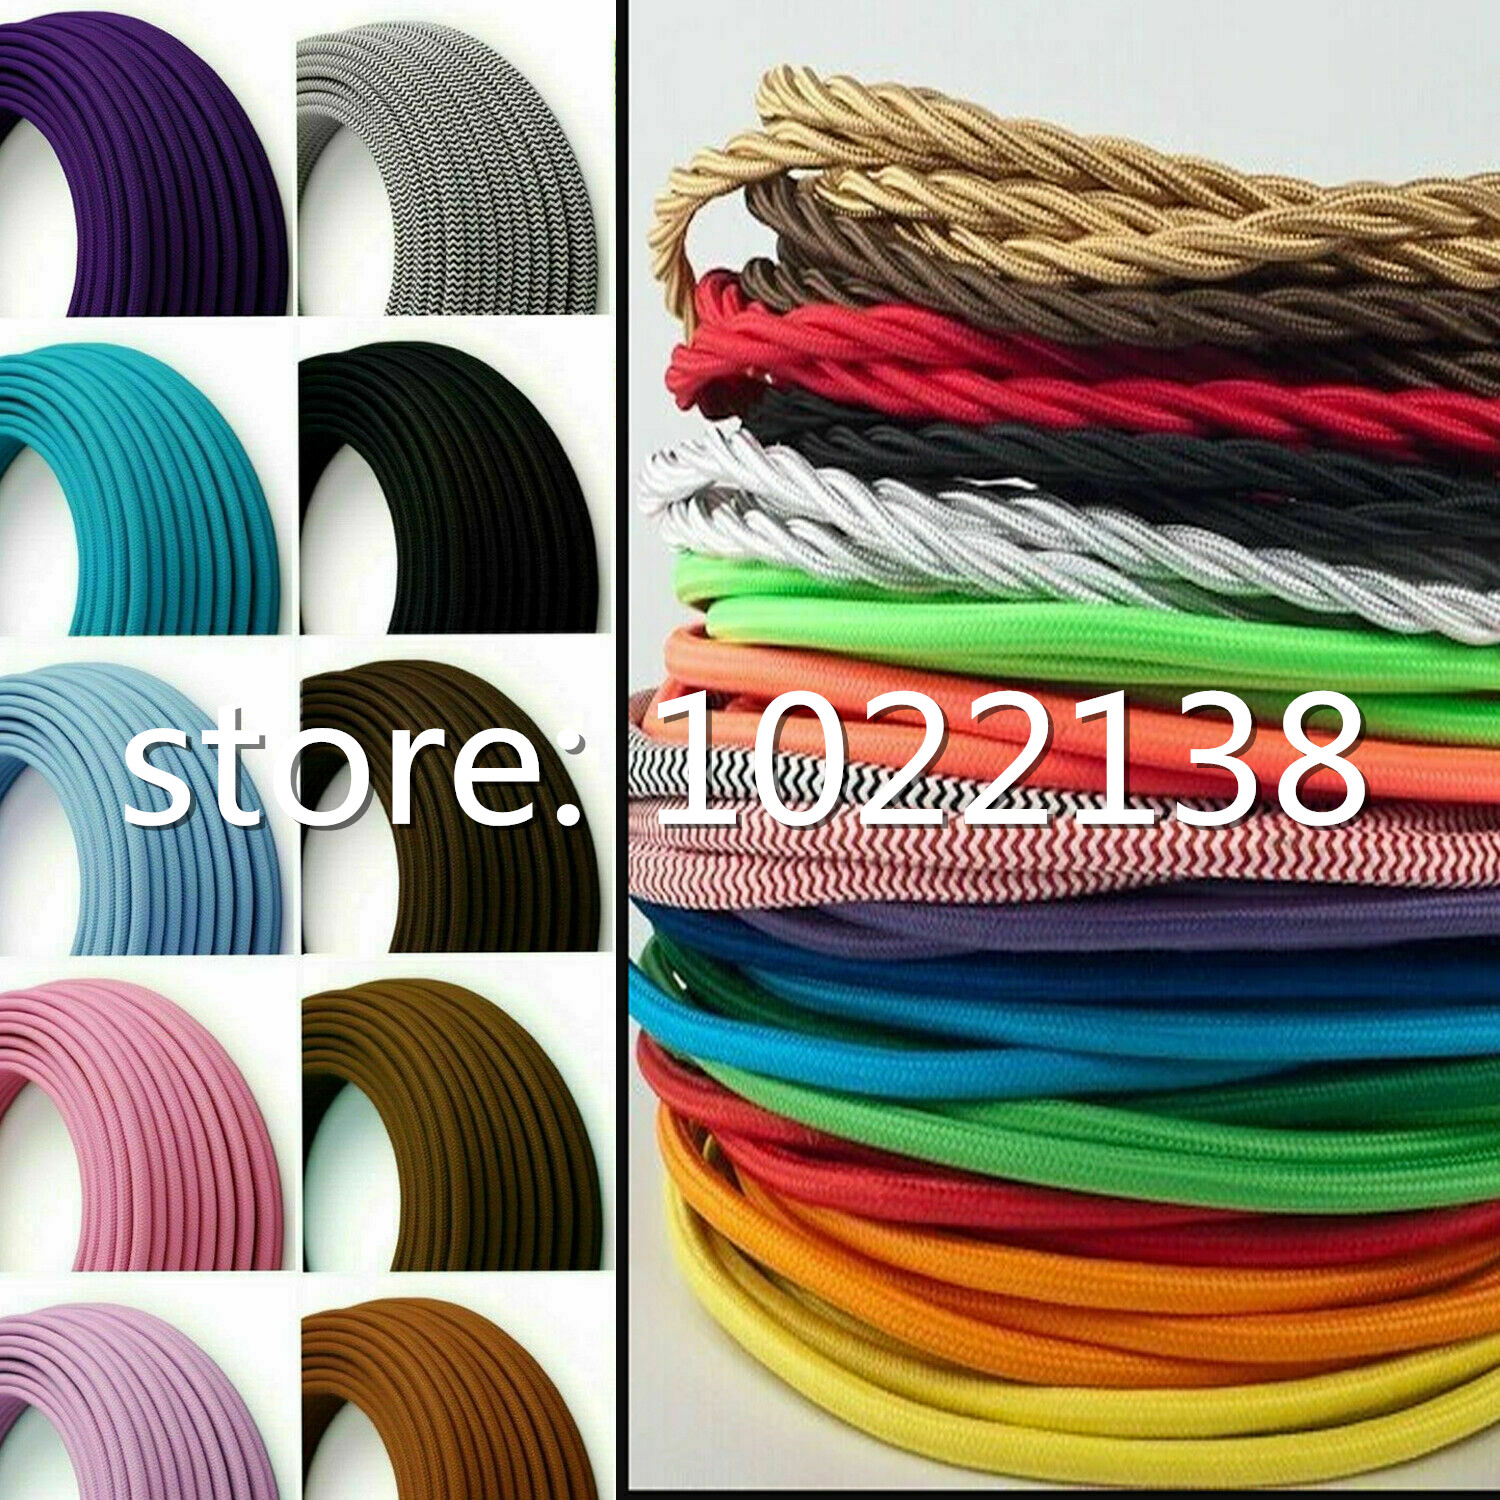 Free shipping vintage textile lamp wire retro electric cord cloth covered fabric lamp cable 2*0.75mm